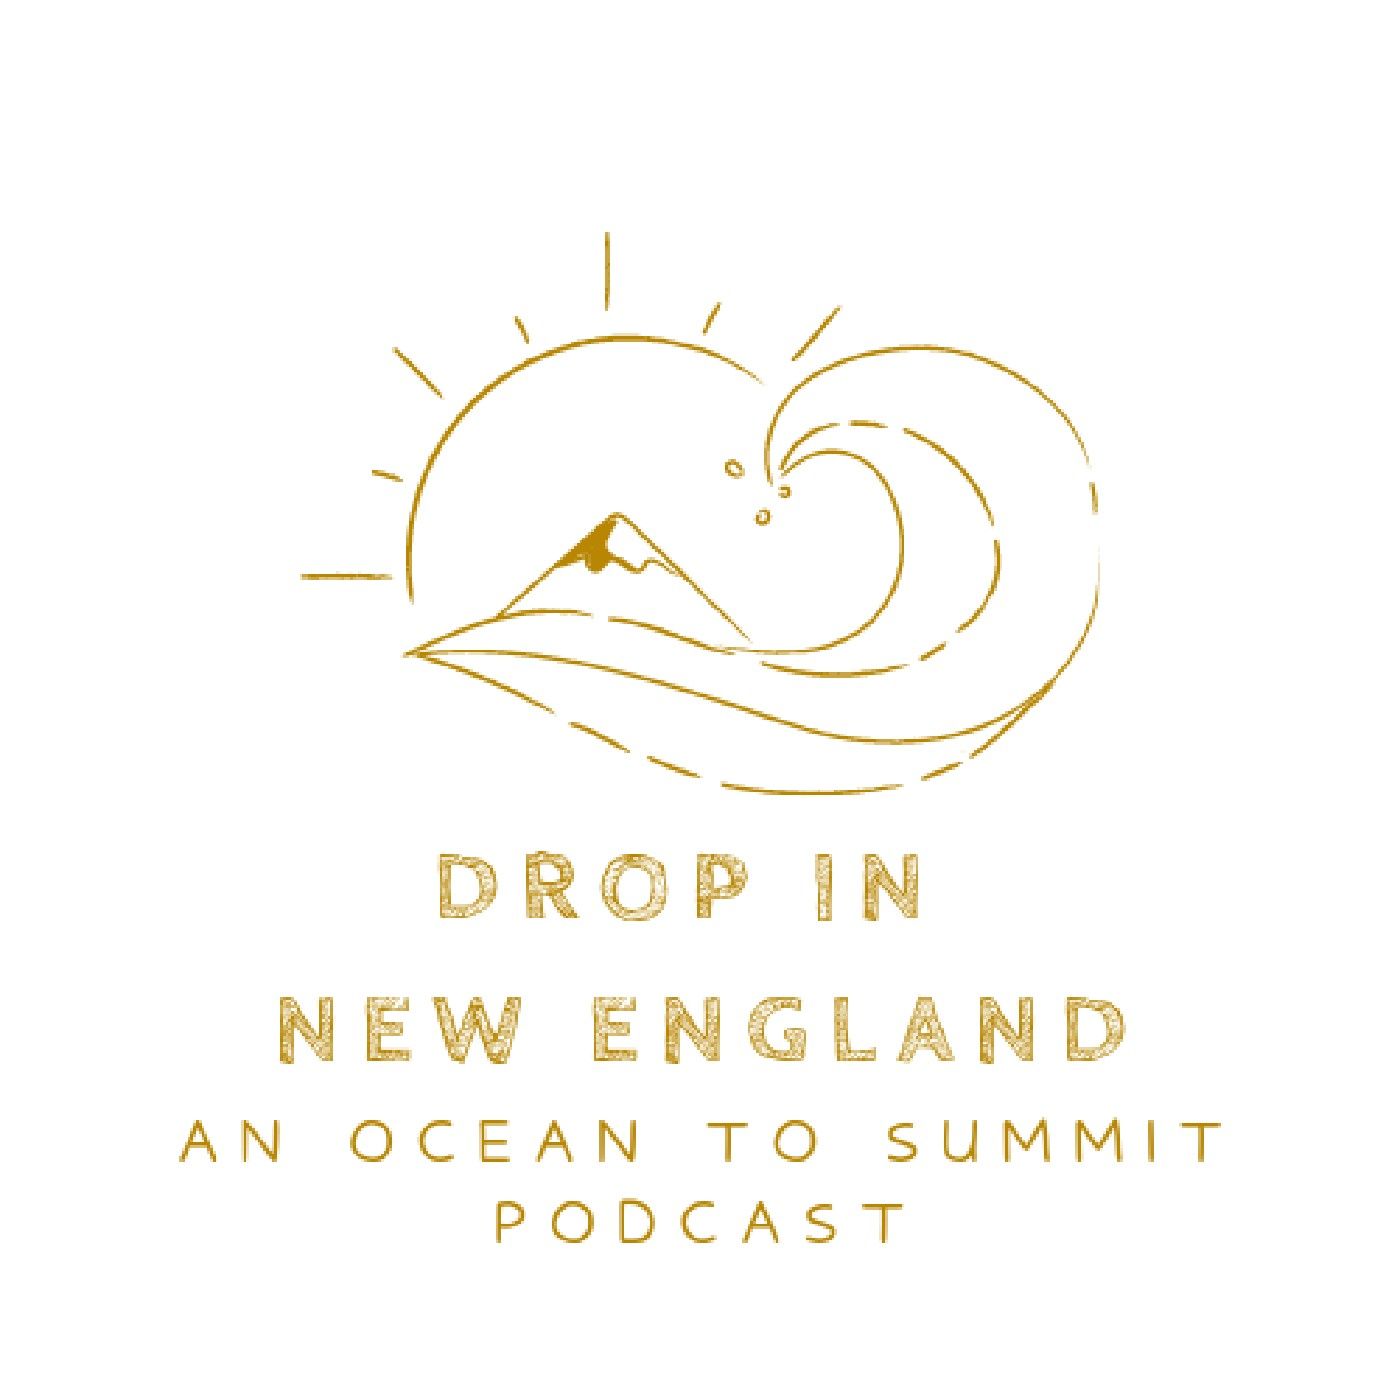 "DROP IN New England"